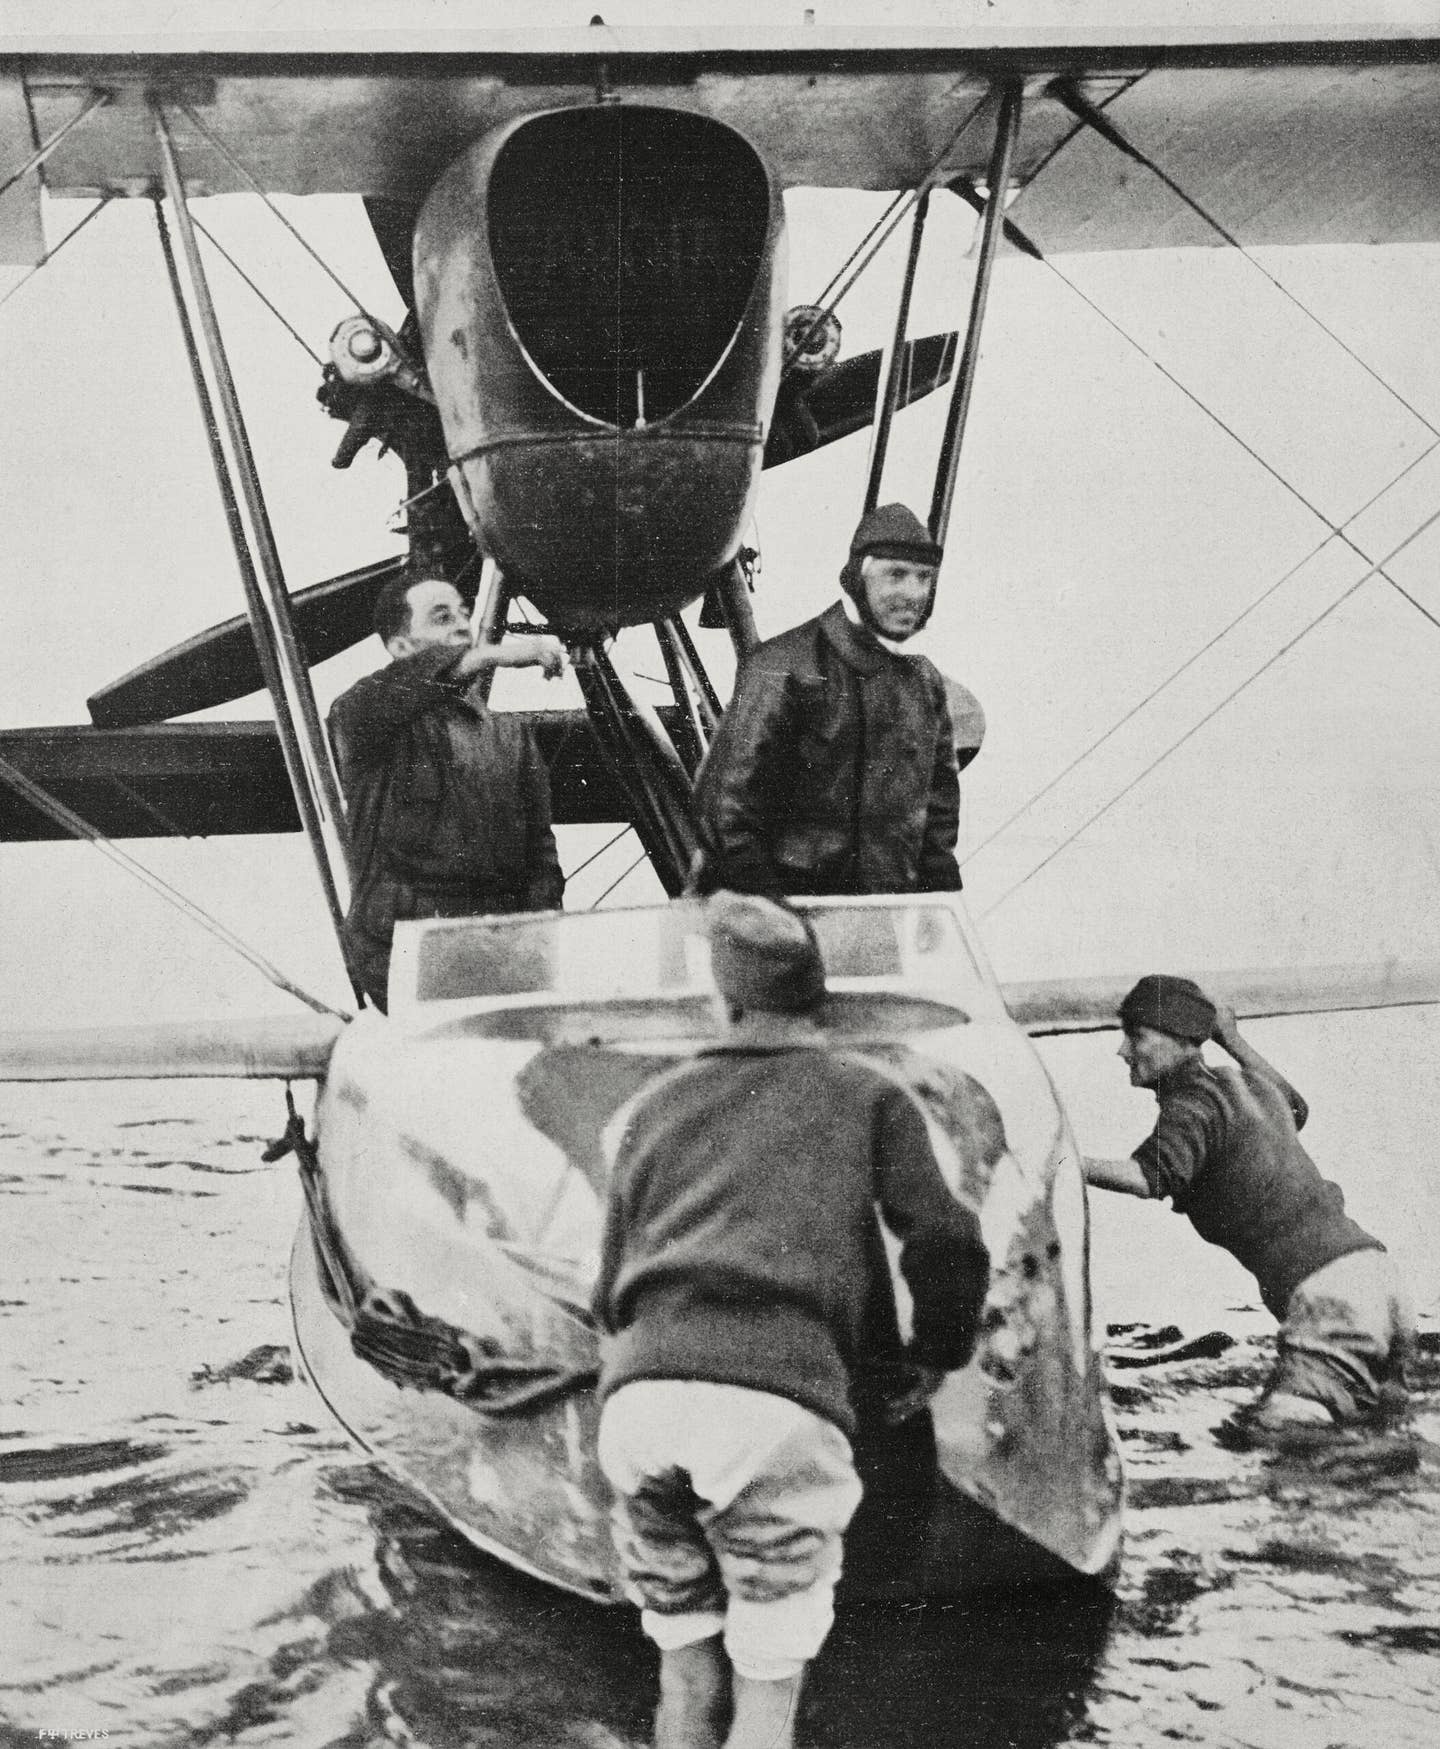 Commander Francesco De Pinedo and his mechanic Ernesto Campanelli aboard the seaplane they flew to Melbourne and Tokyo. The photo was taken at the port of Taranto, Italy, in November 1925. <em>Getty Images</em>